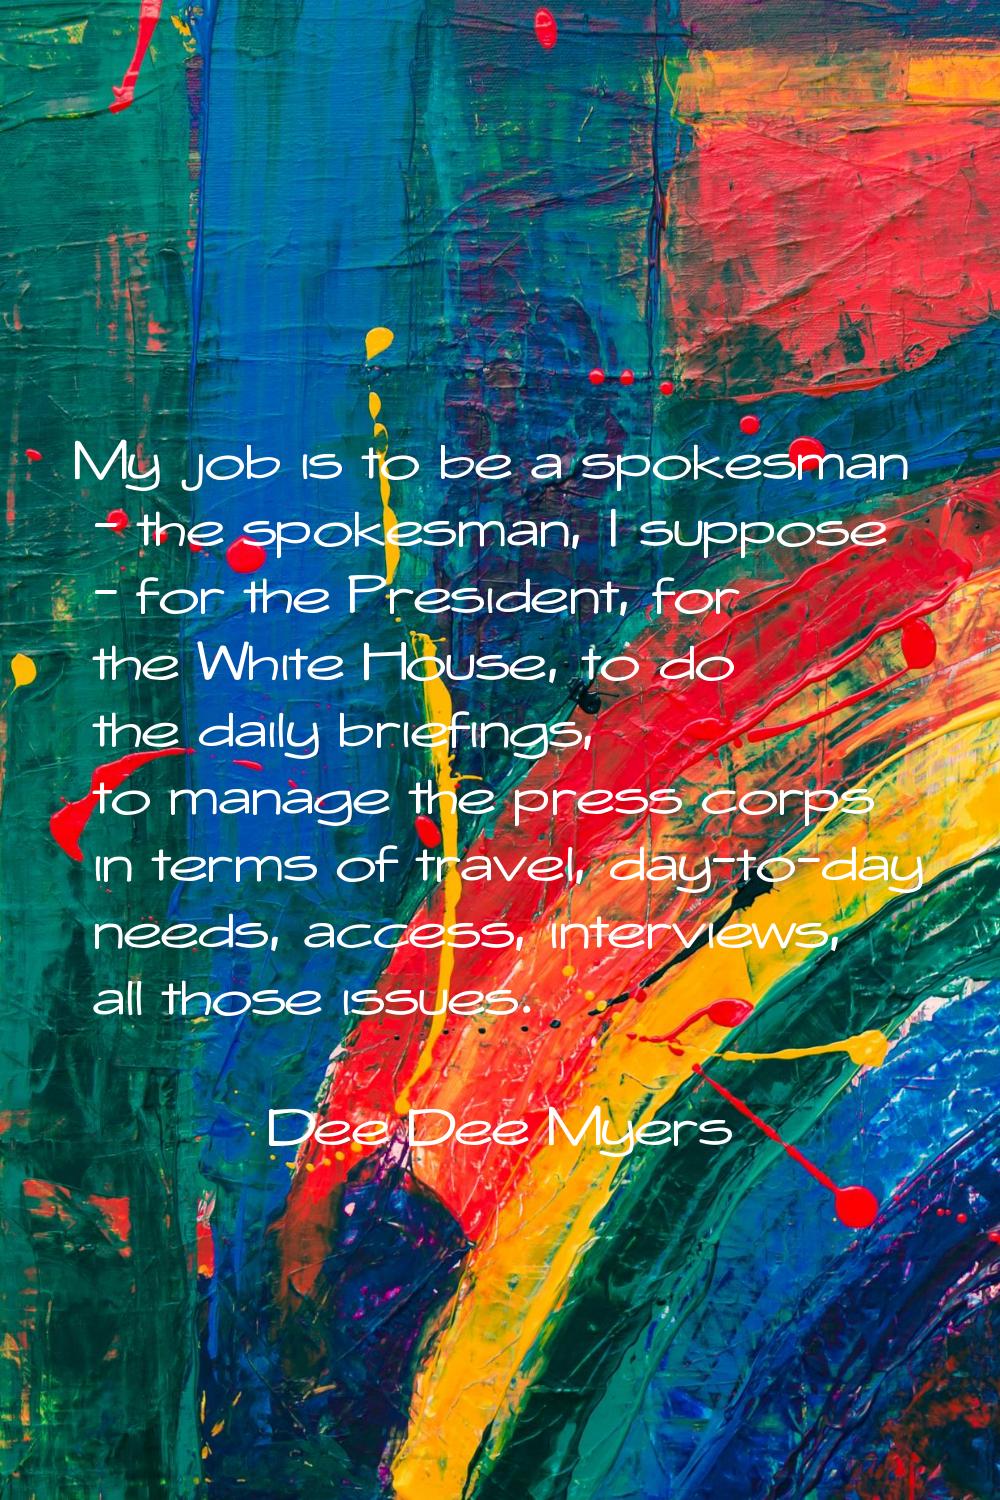 My job is to be a spokesman - the spokesman, I suppose - for the President, for the White House, to